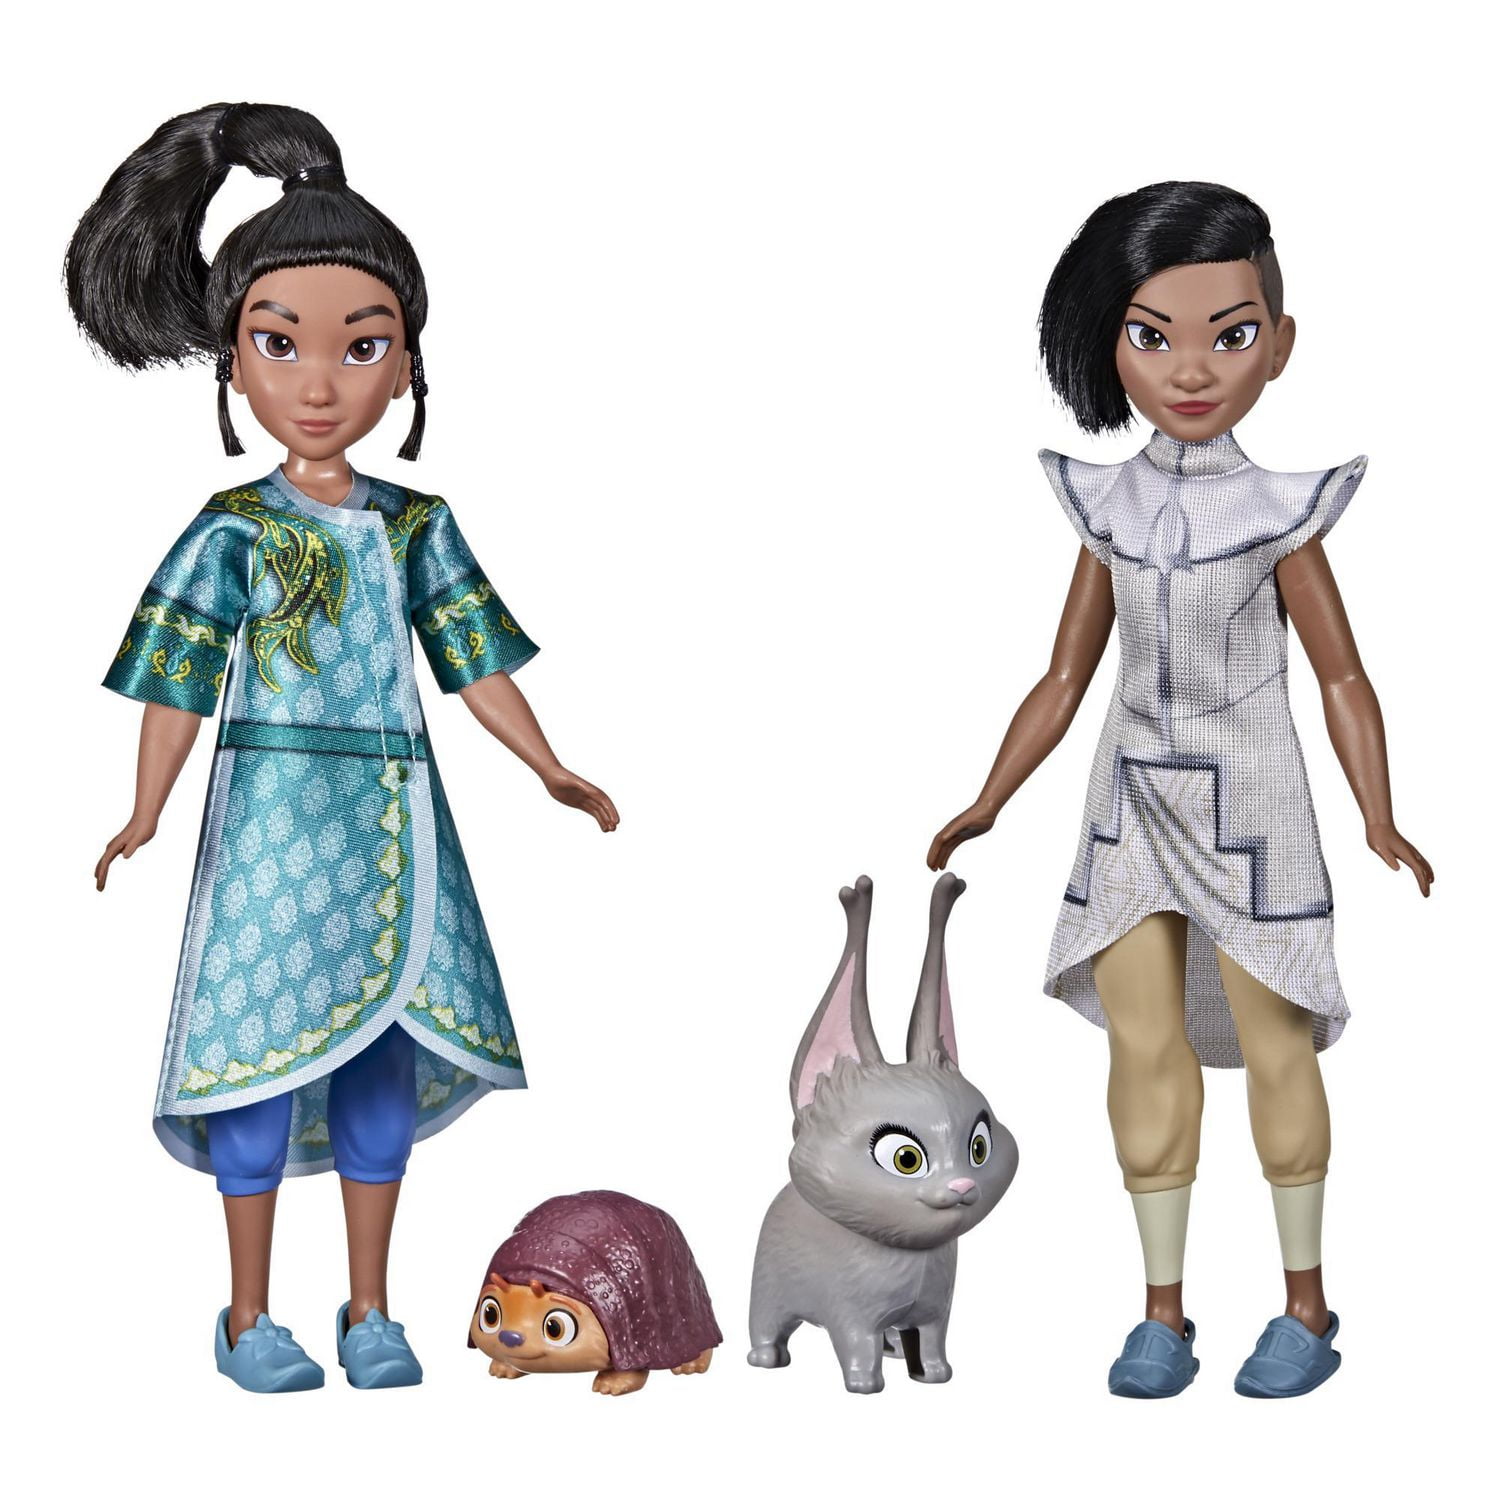 Disney's Raya and the Last Dragon - Little Noi (the baby) and the